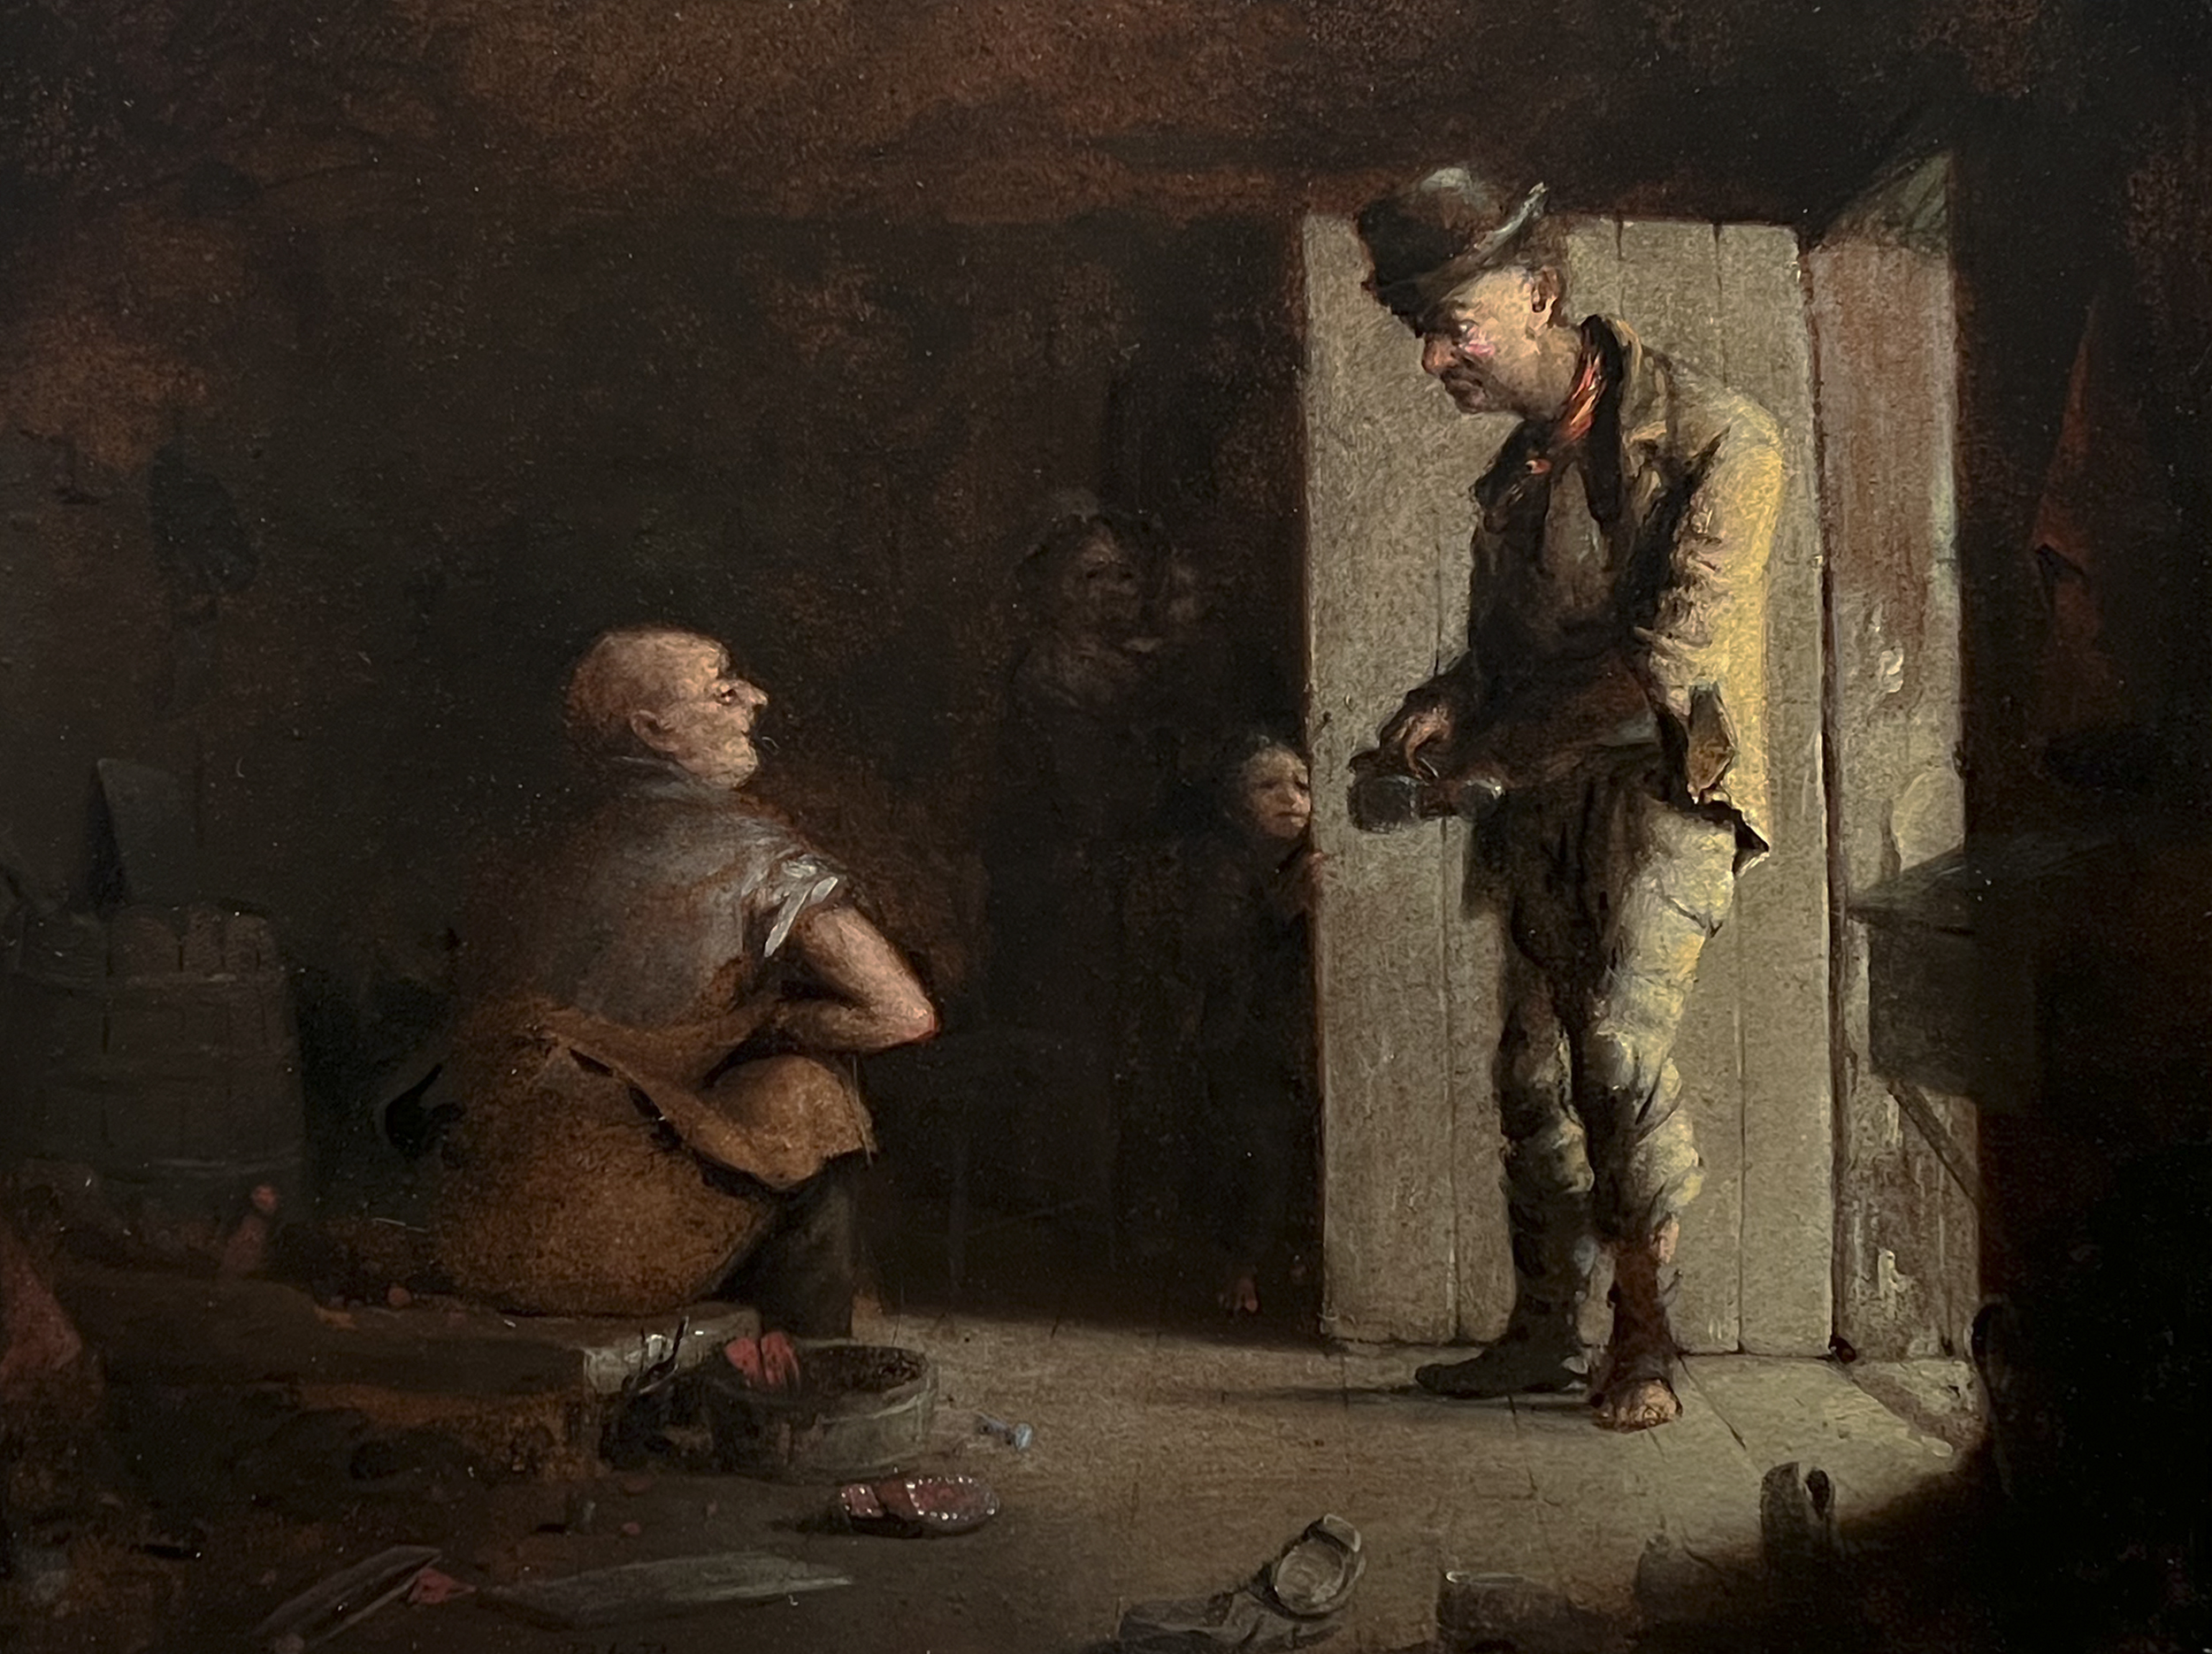 Visit A painting called The Cobbler’s Shop. Image of a man in doorway, another man sitting.